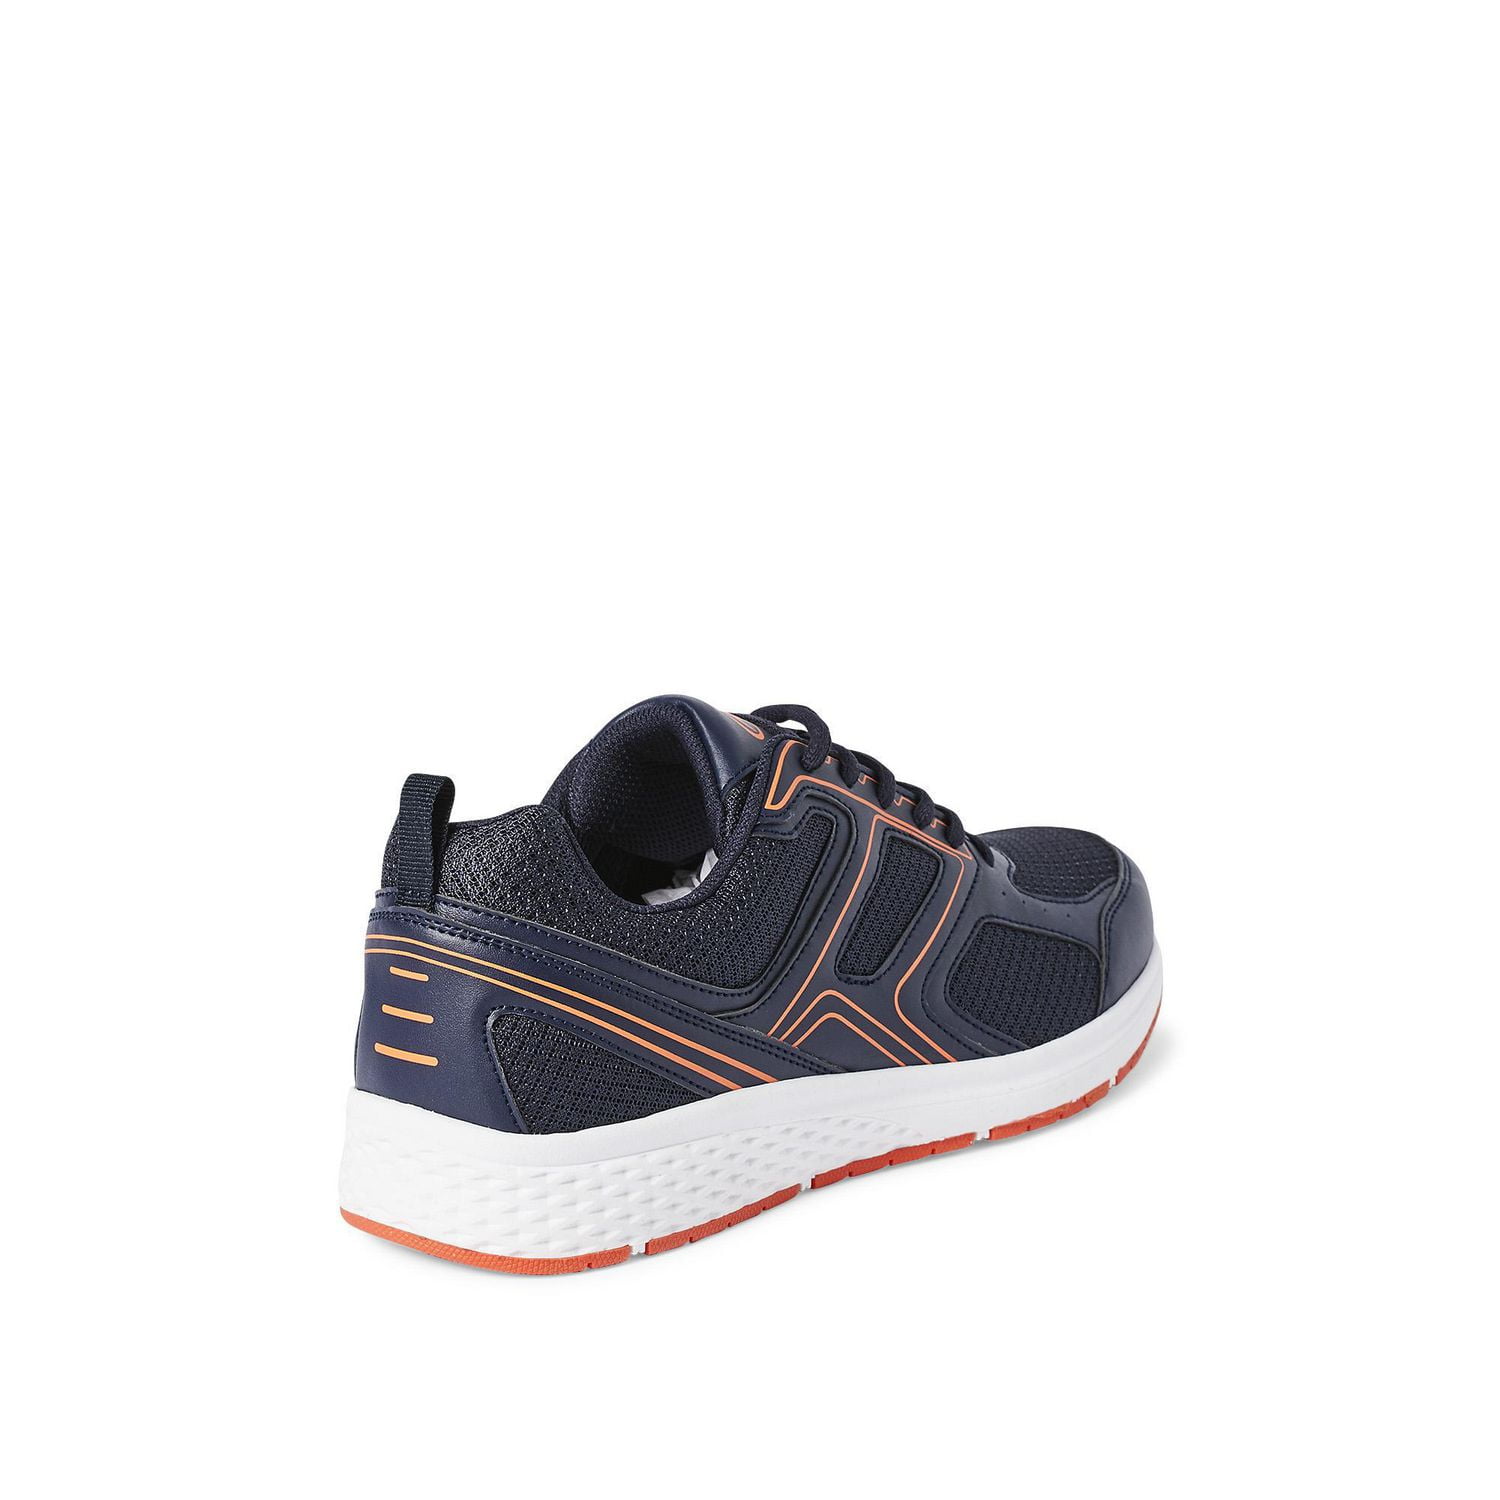 Good Athletic Shoes & Sports Trainers Wholesale, Athletic Shoes Company